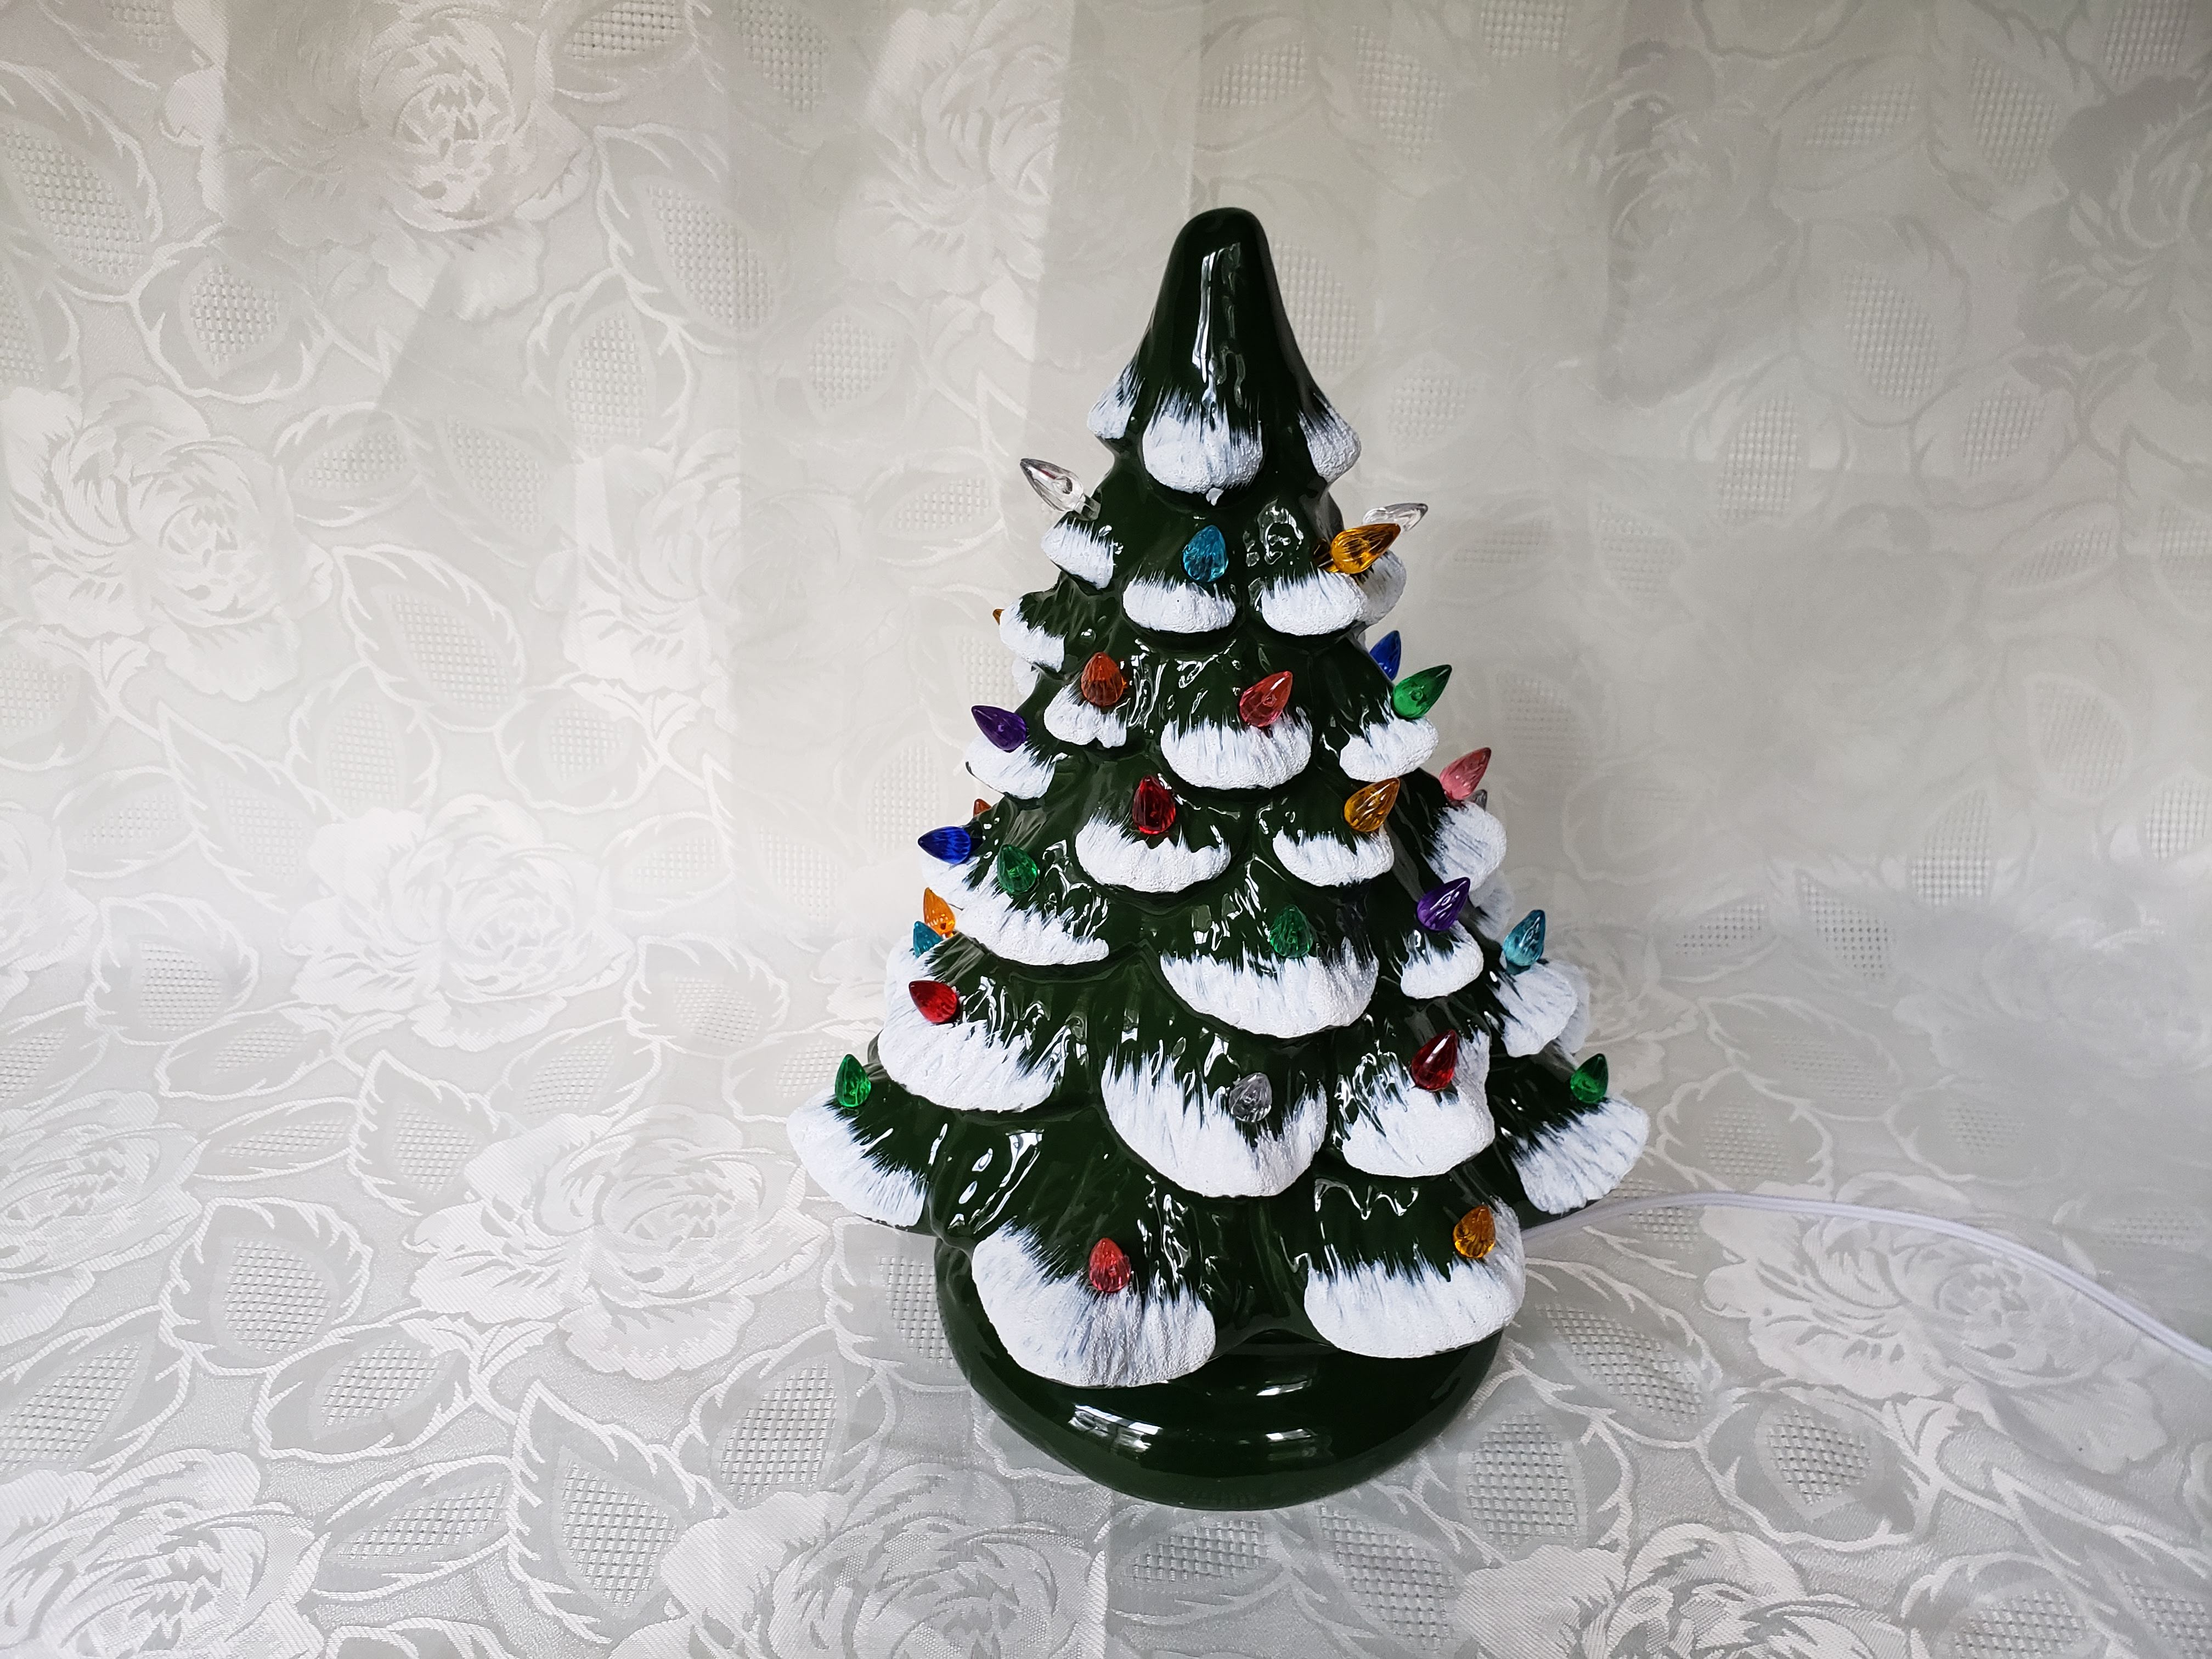 The ceramic Christmas tree is back! Why the retro holiday